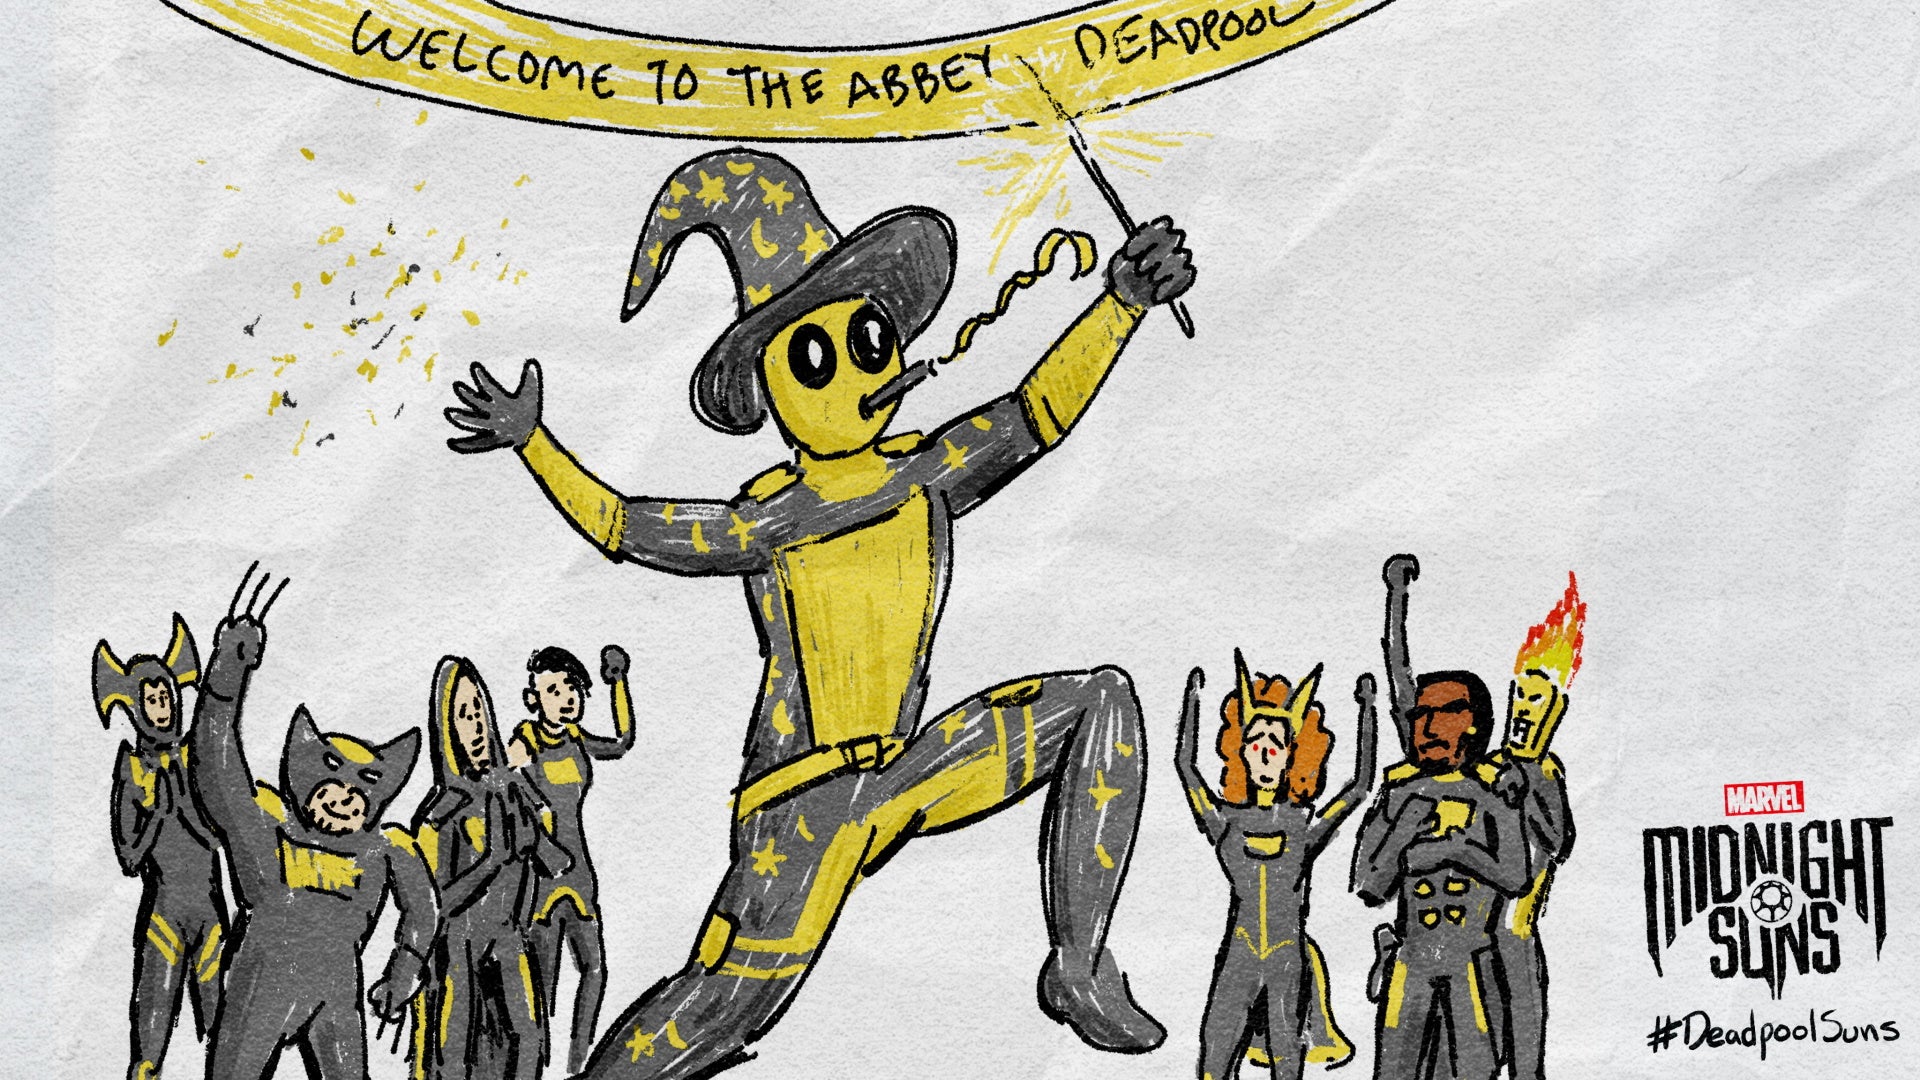 A hand drawn image of Deadpool celebrating his arrival in Marvel's Midnight Suns